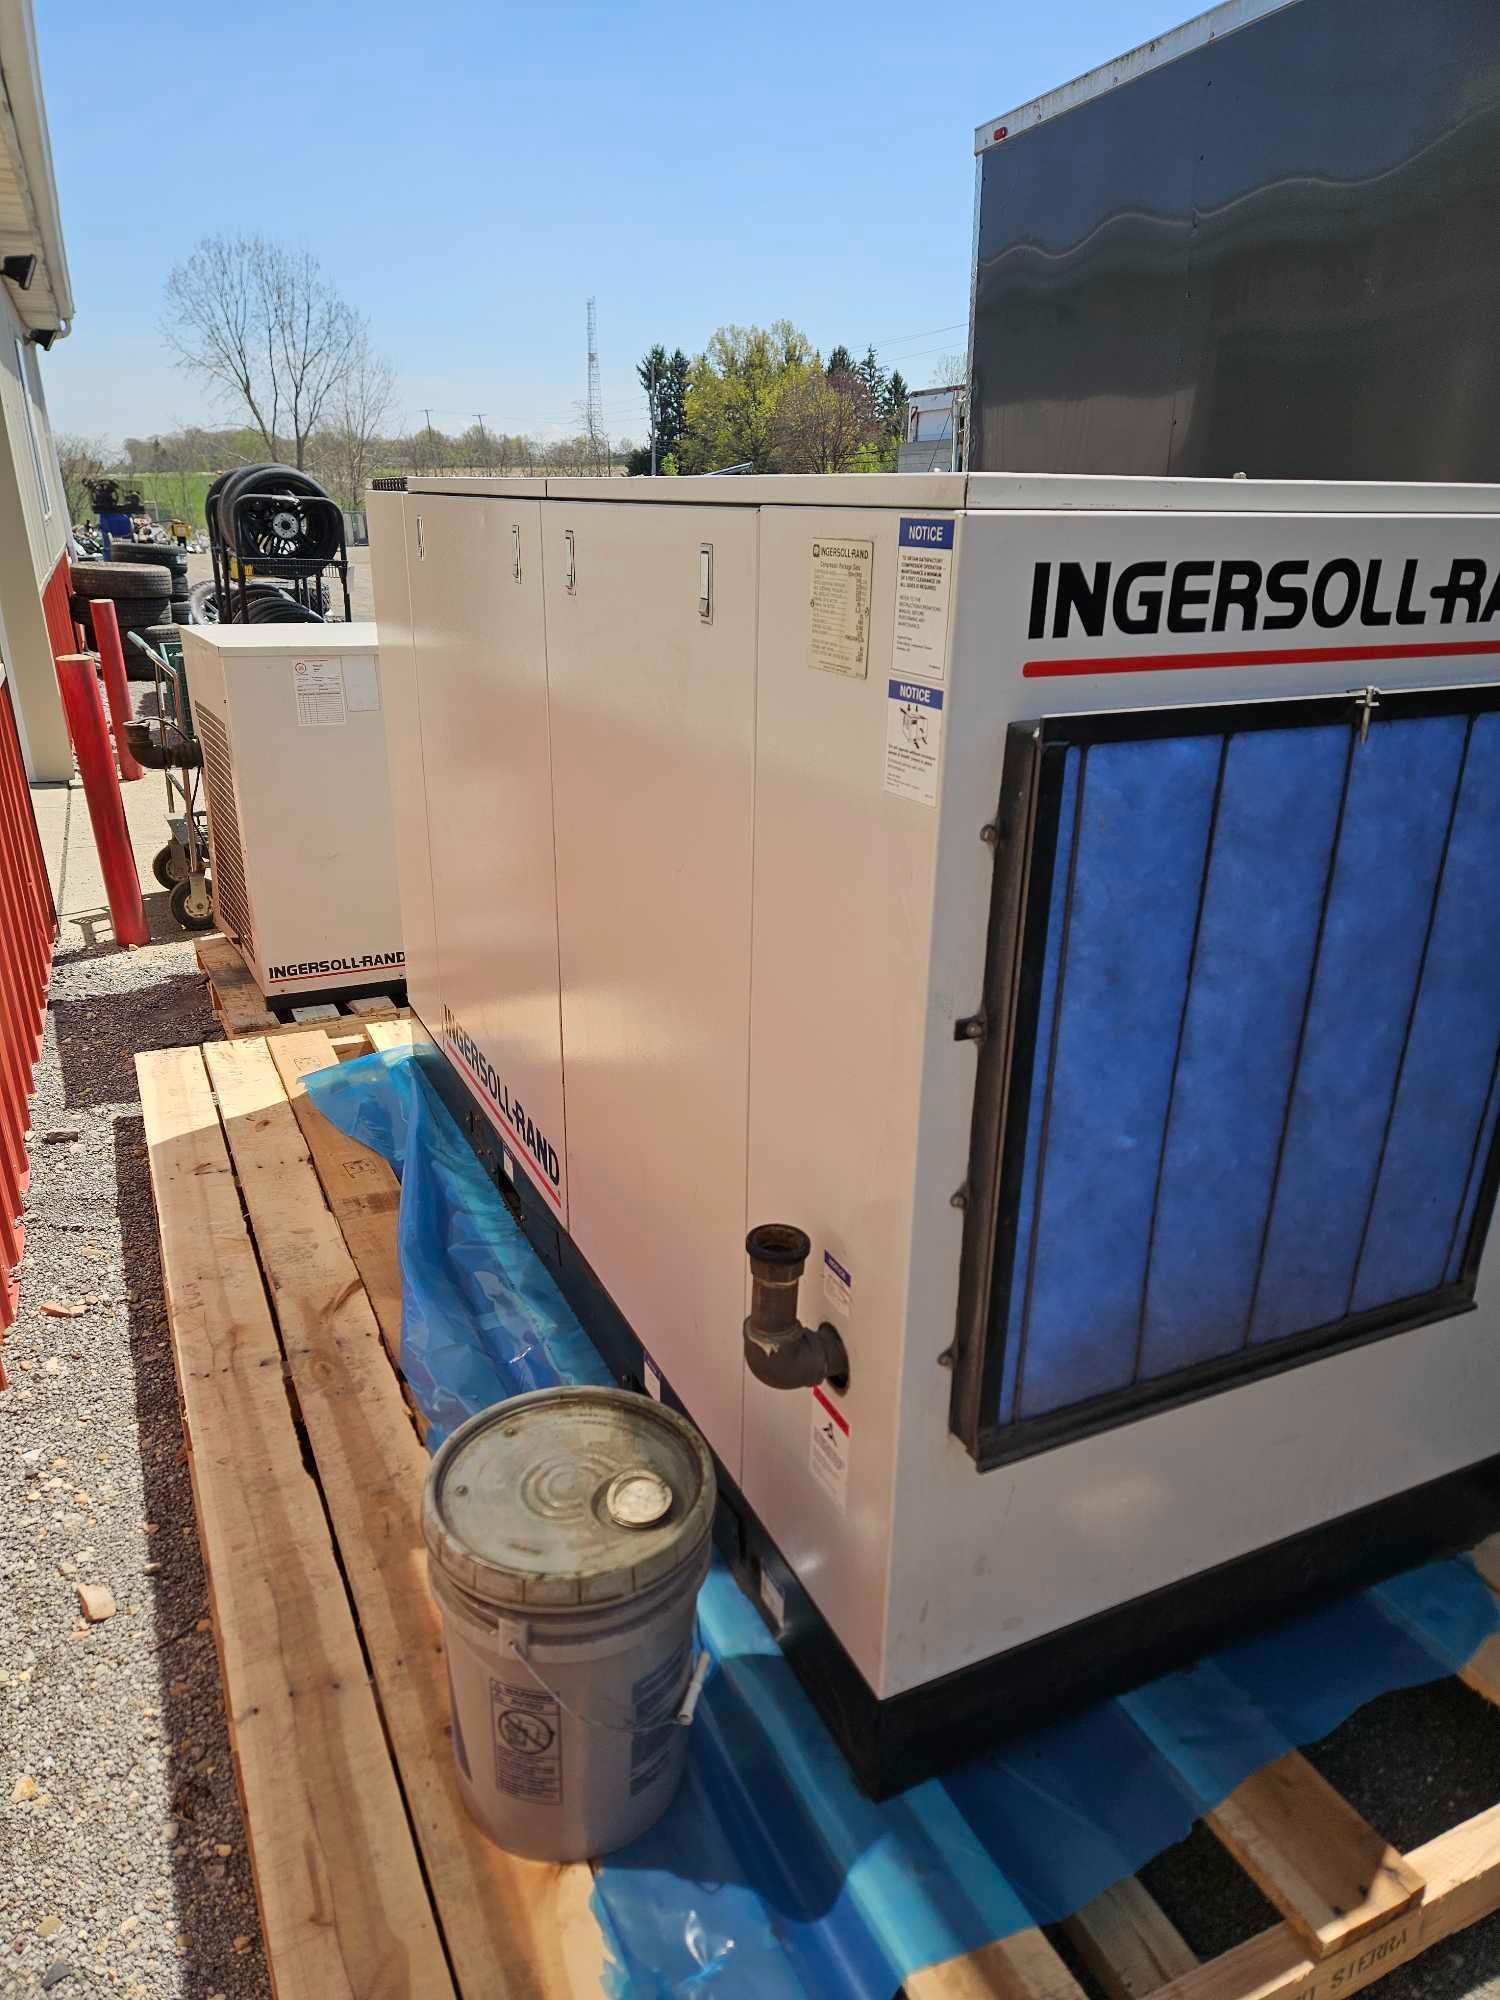 Ingersoll-Rand SSR-EP60 rotary screw air compressor and dryer, compressor model: SSR-EP60